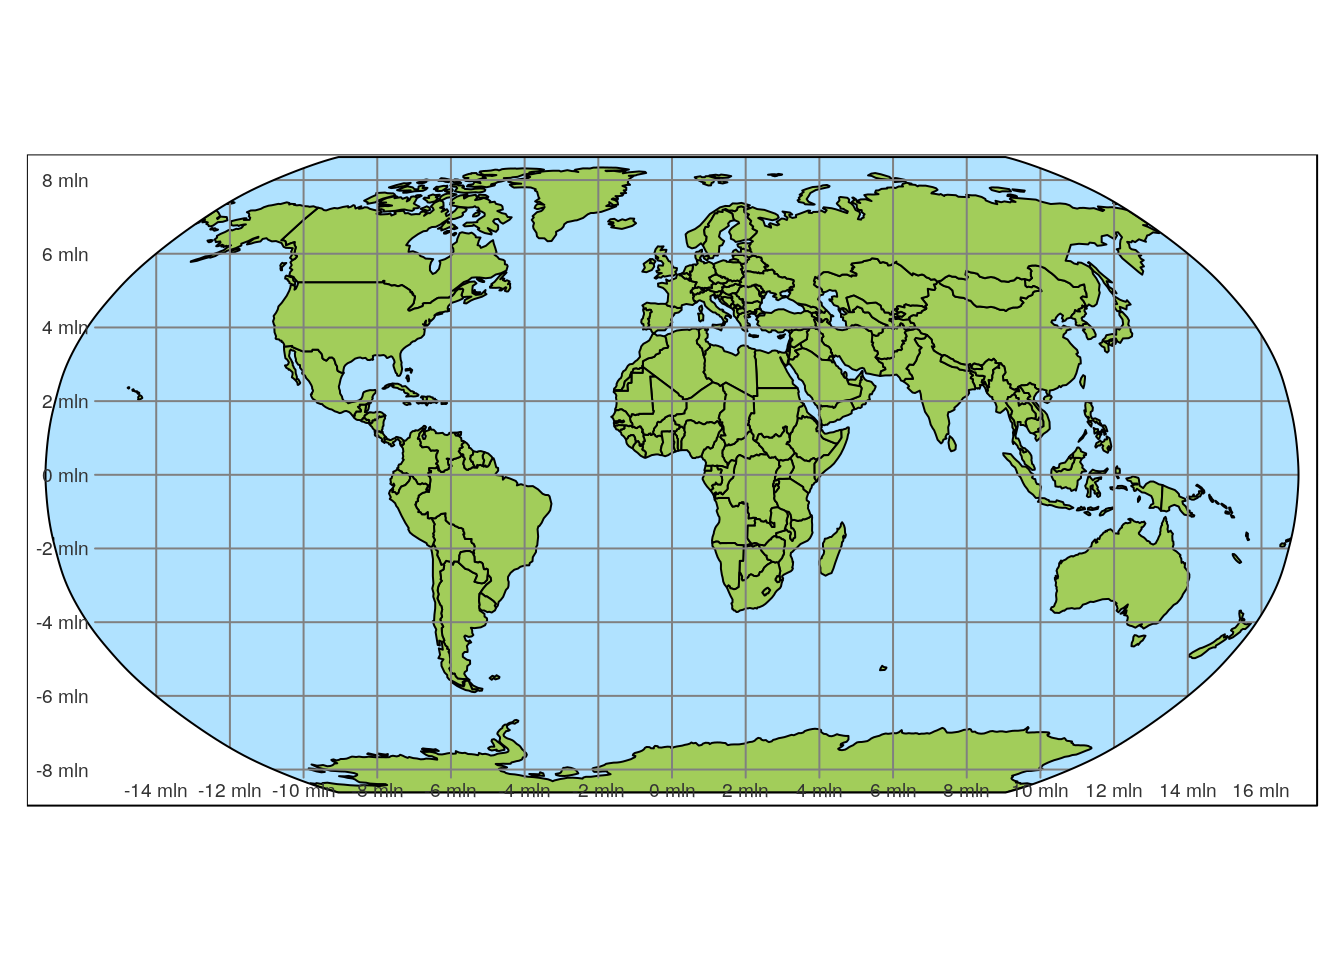 Countries of the world projected to the Robinson projection